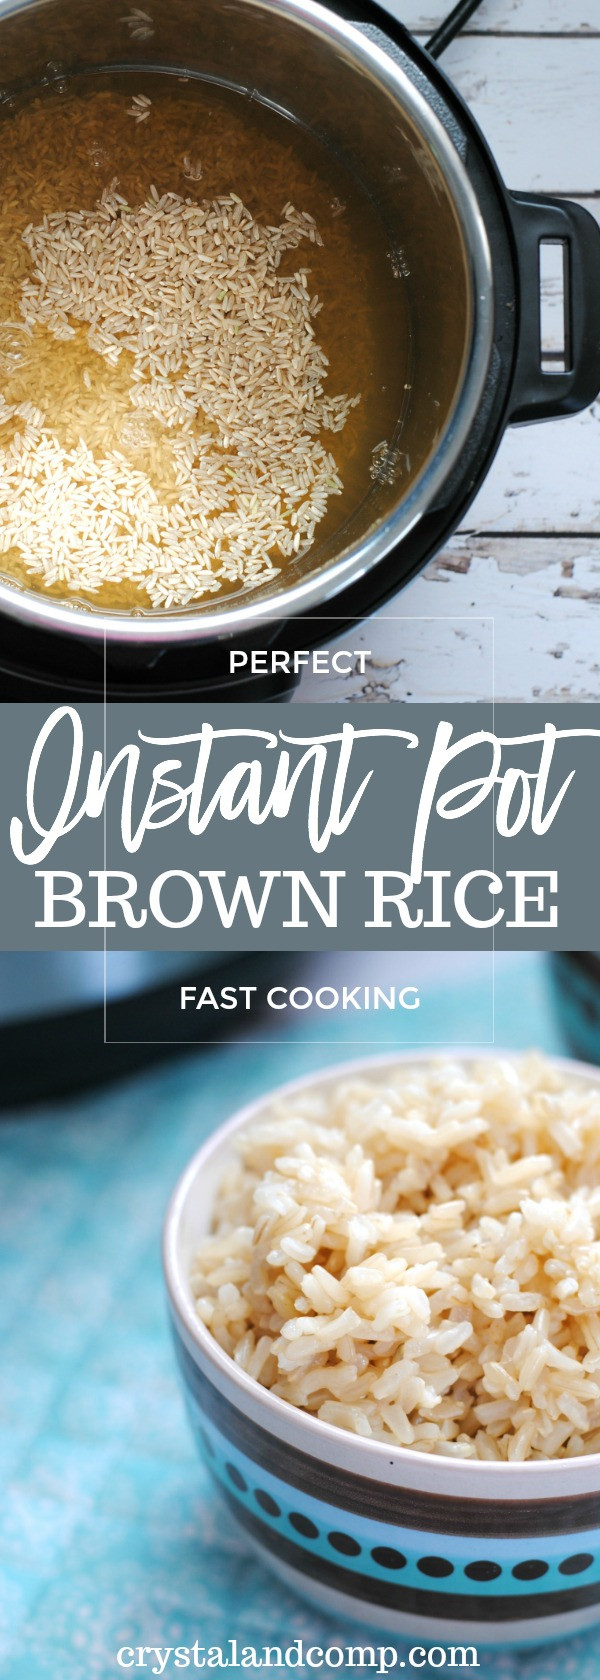 Long Grain Brown Rice Instant Pot
 How to Make Brown Rice in the Instant Pot